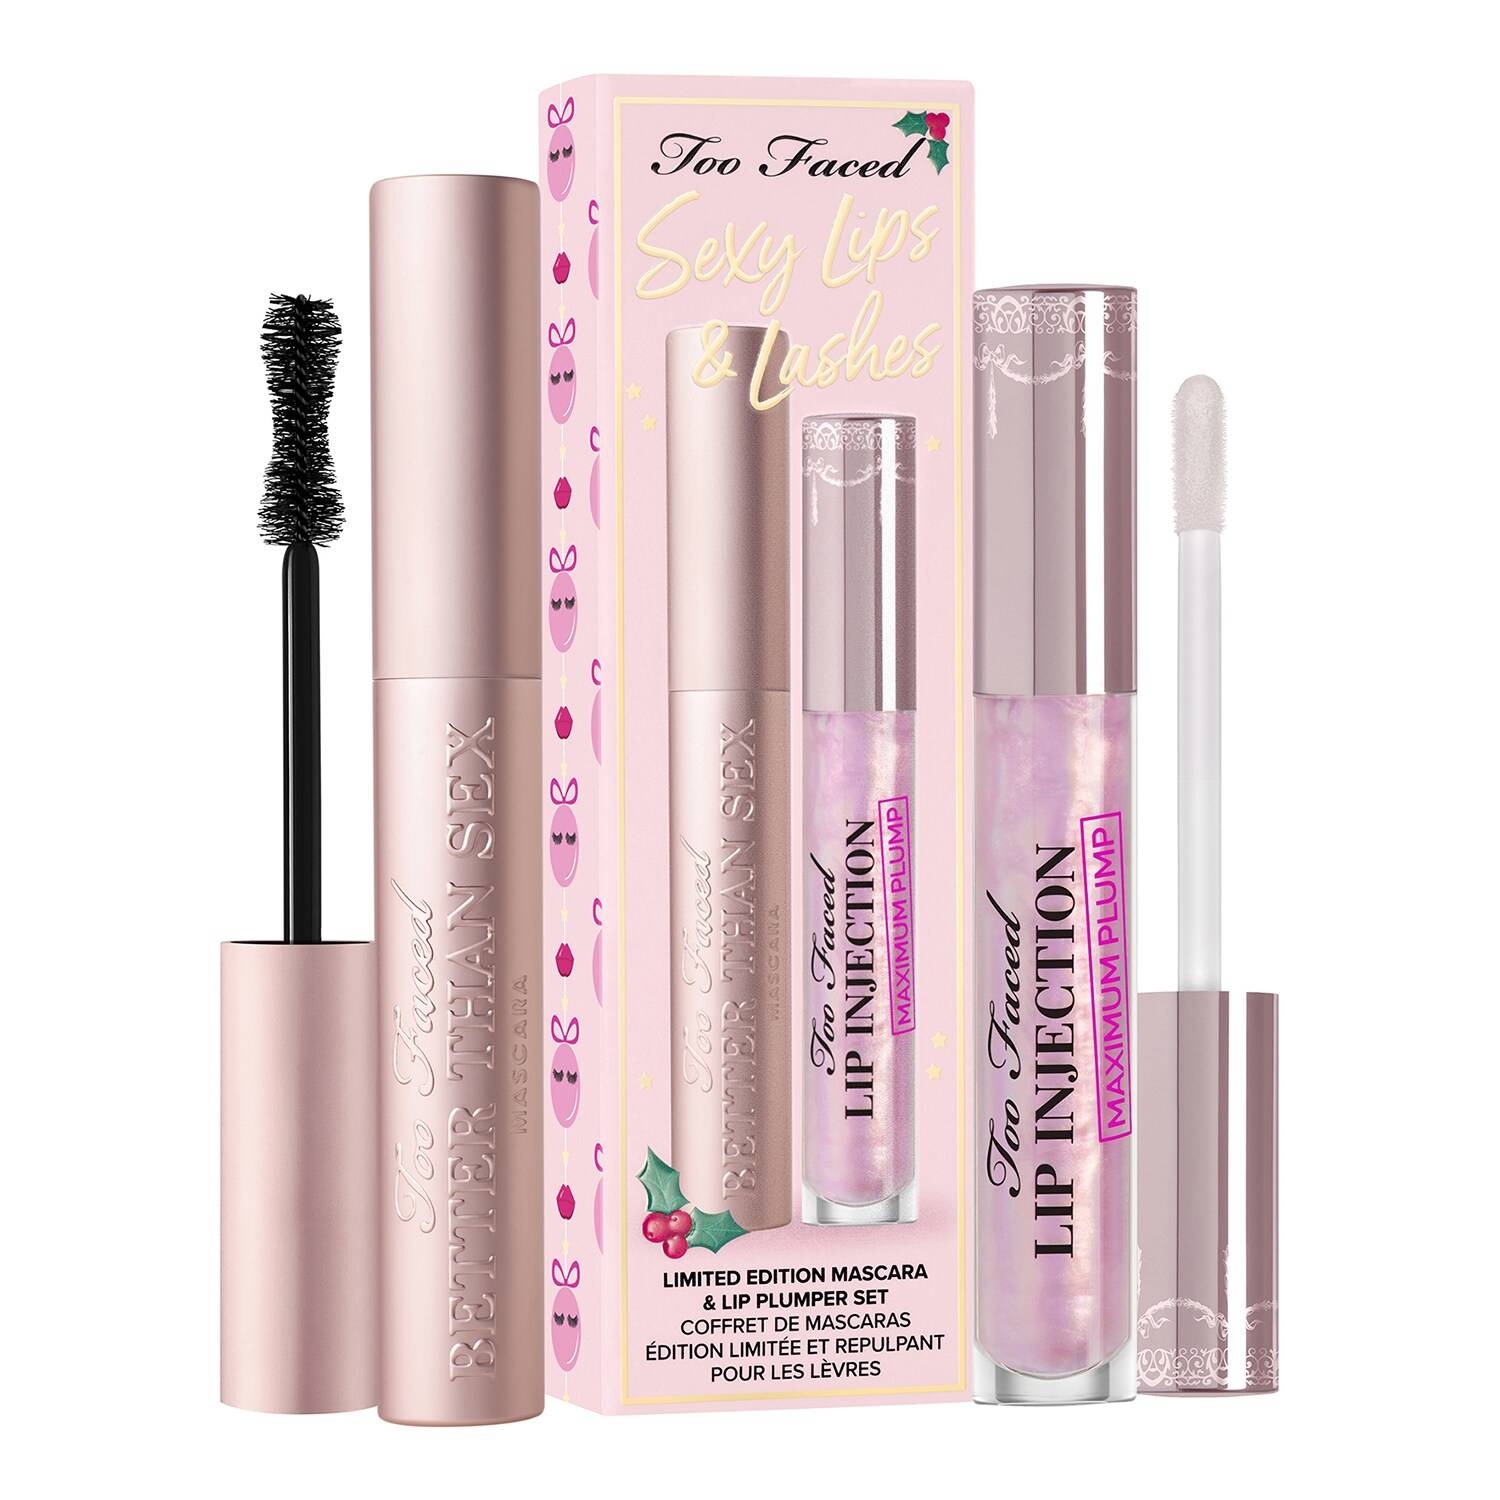 TOO FACED Sexy Lips & Lashes � Makeup Set